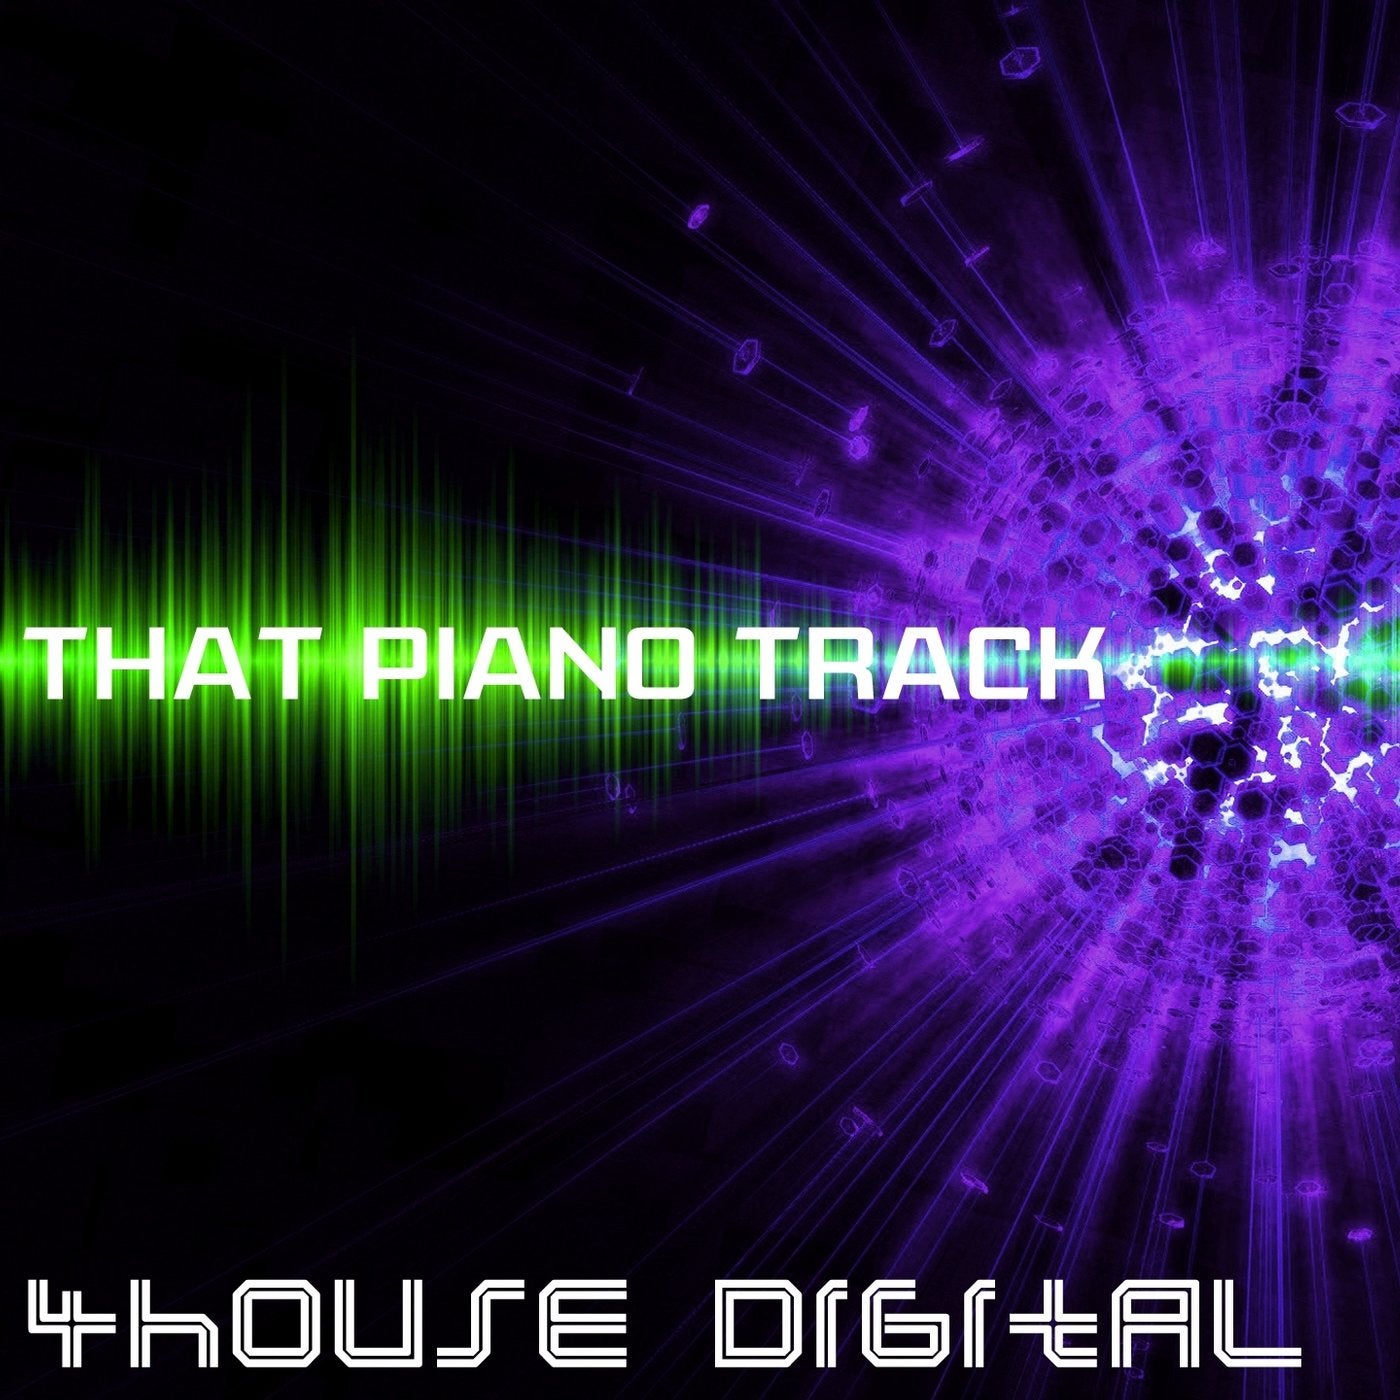 4house Digital: That Piano Track